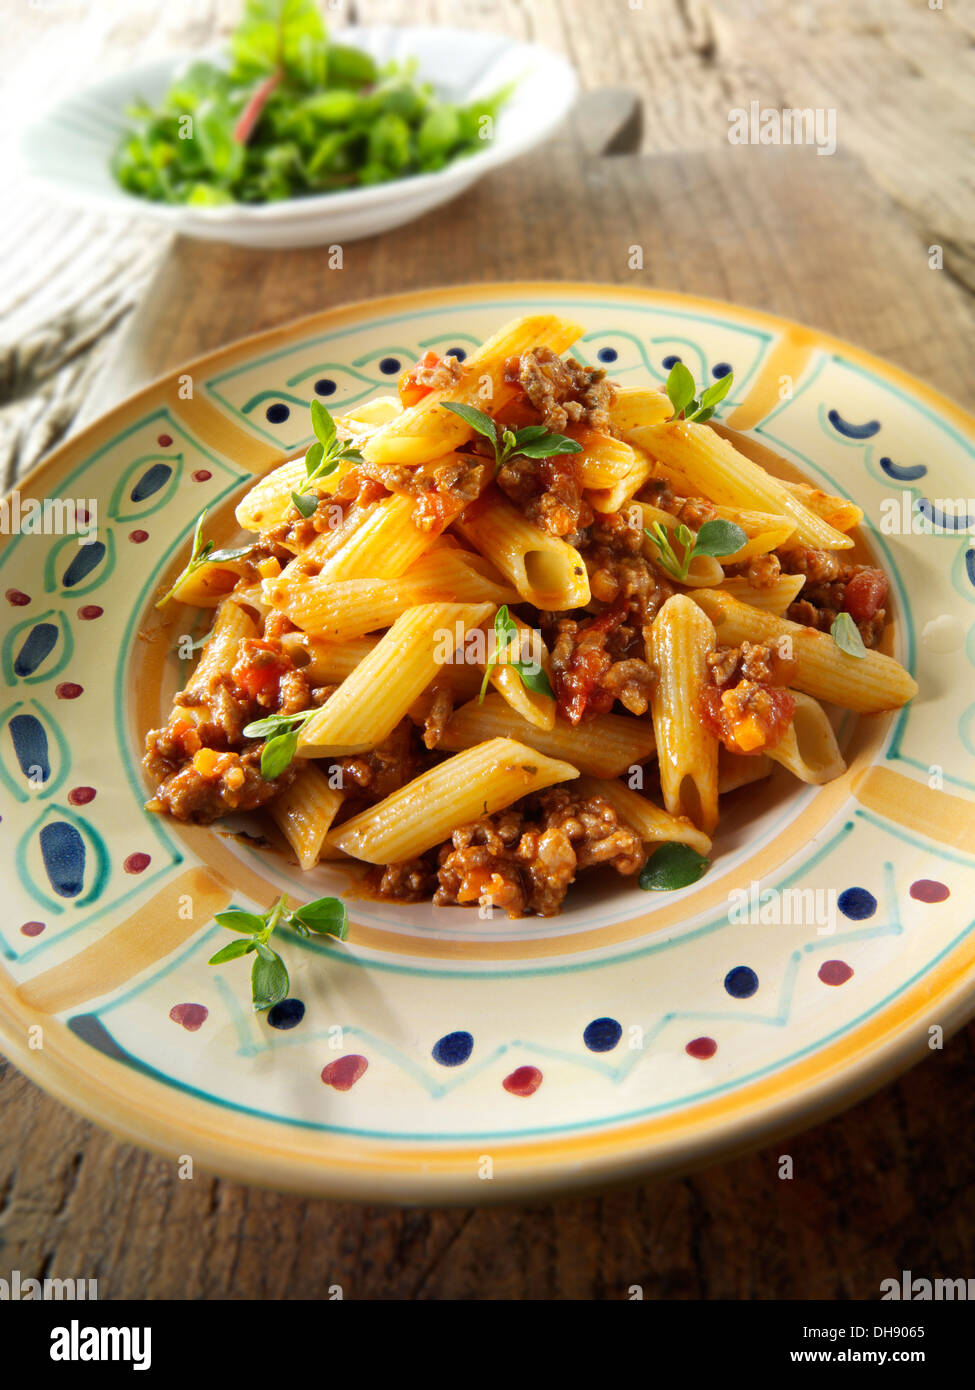 Pene pasta with a Bolognese sauce Stock Photo